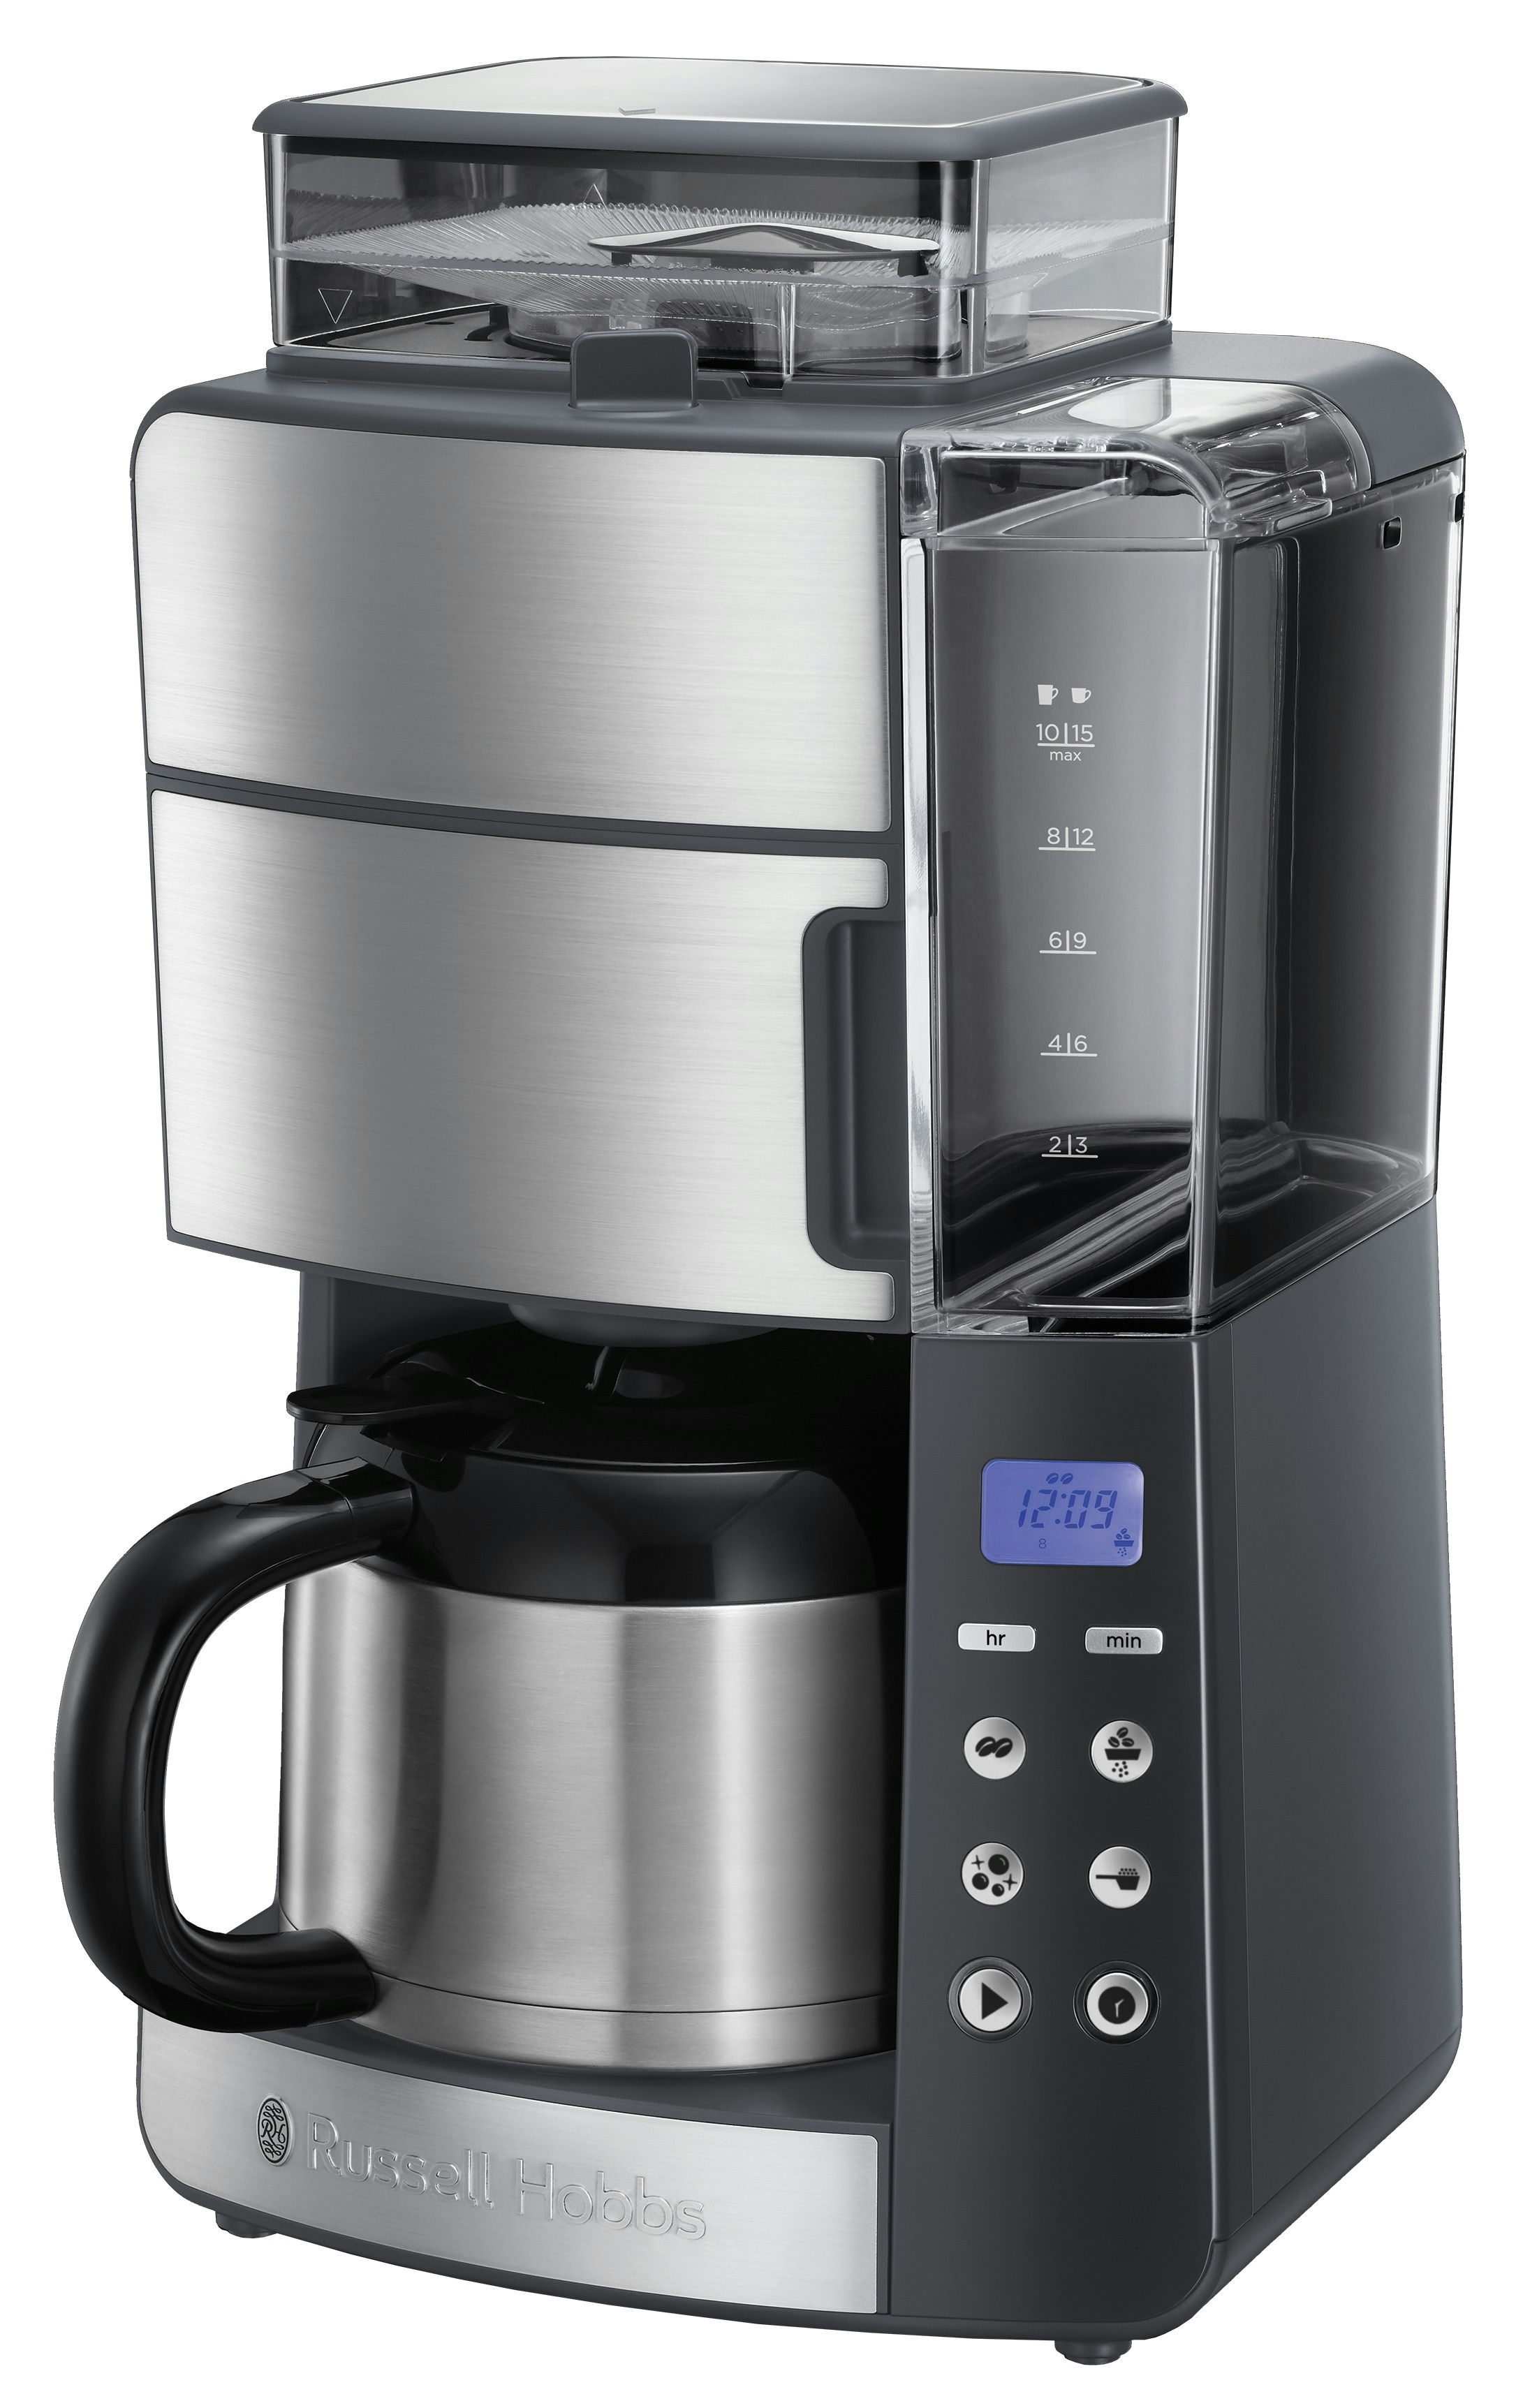 Russell Hobbs Grind&Brew Dig. Thermo-Kaffeemaschine 25620- 56